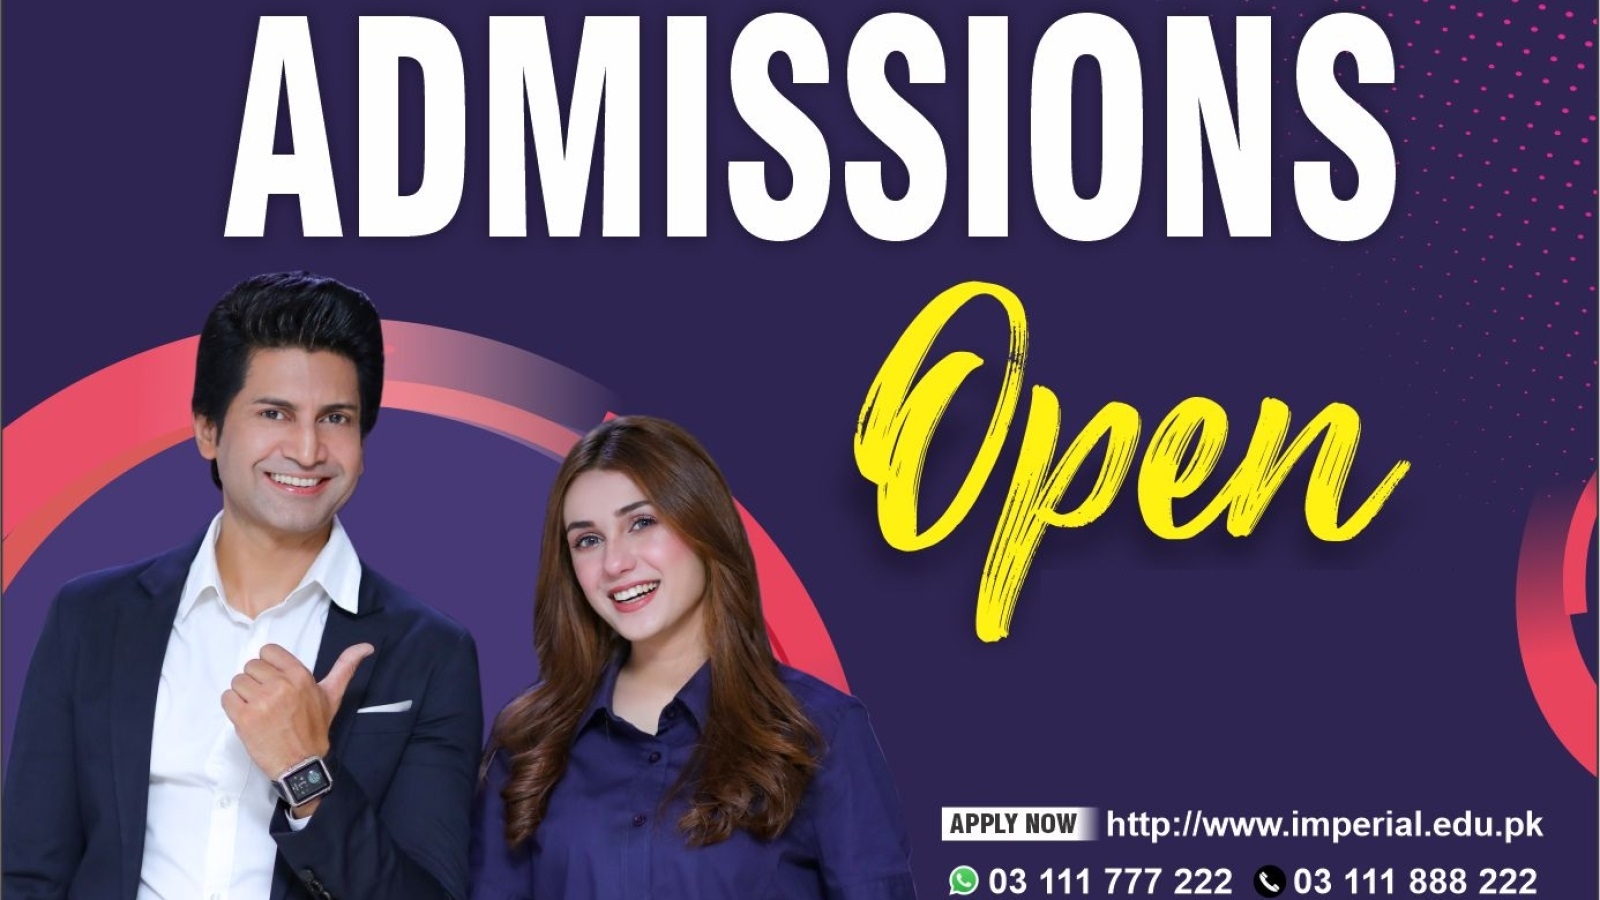 Admission open front image